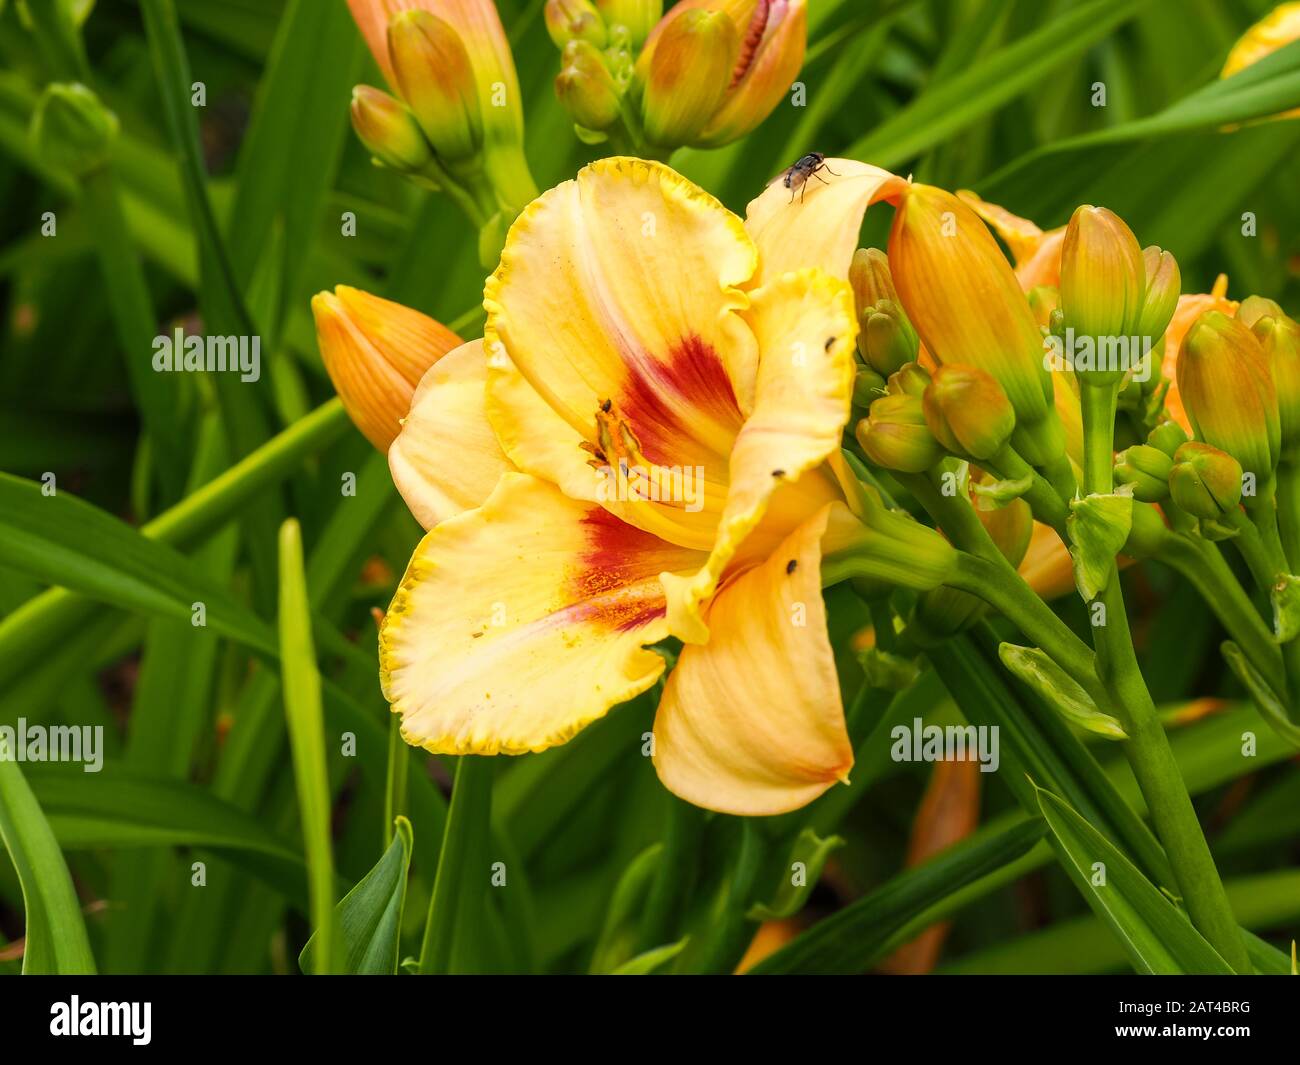 Large yellow flower, buds and green leaves of the daylily Hemerocallis variety Custard Candy Stock Photo